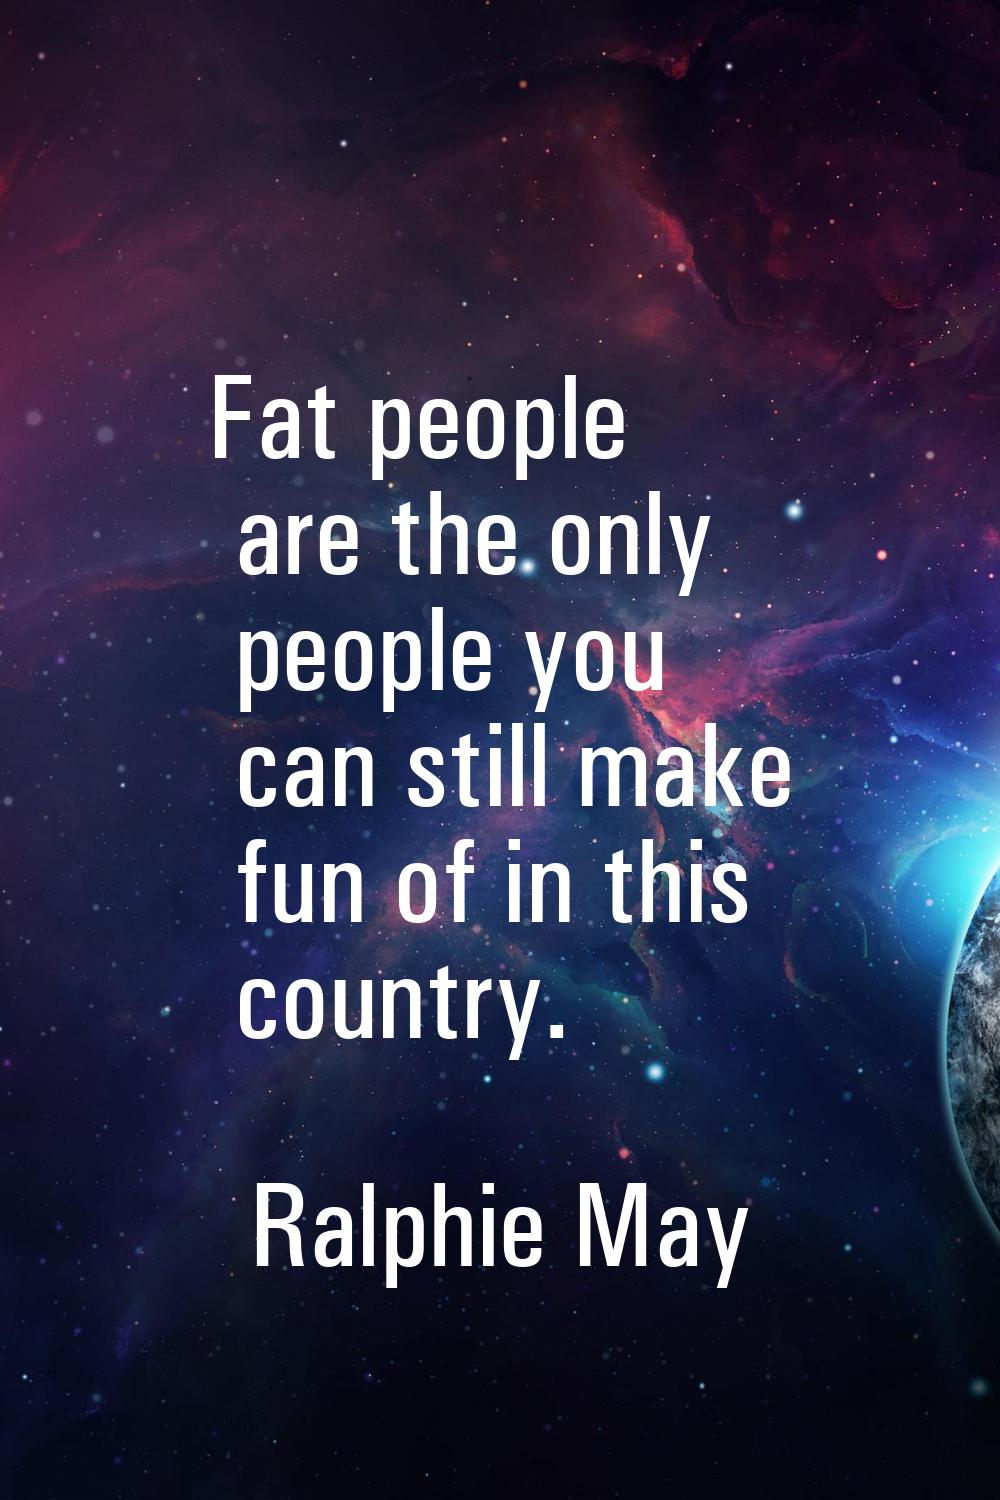 Fat people are the only people you can still make fun of in this country.